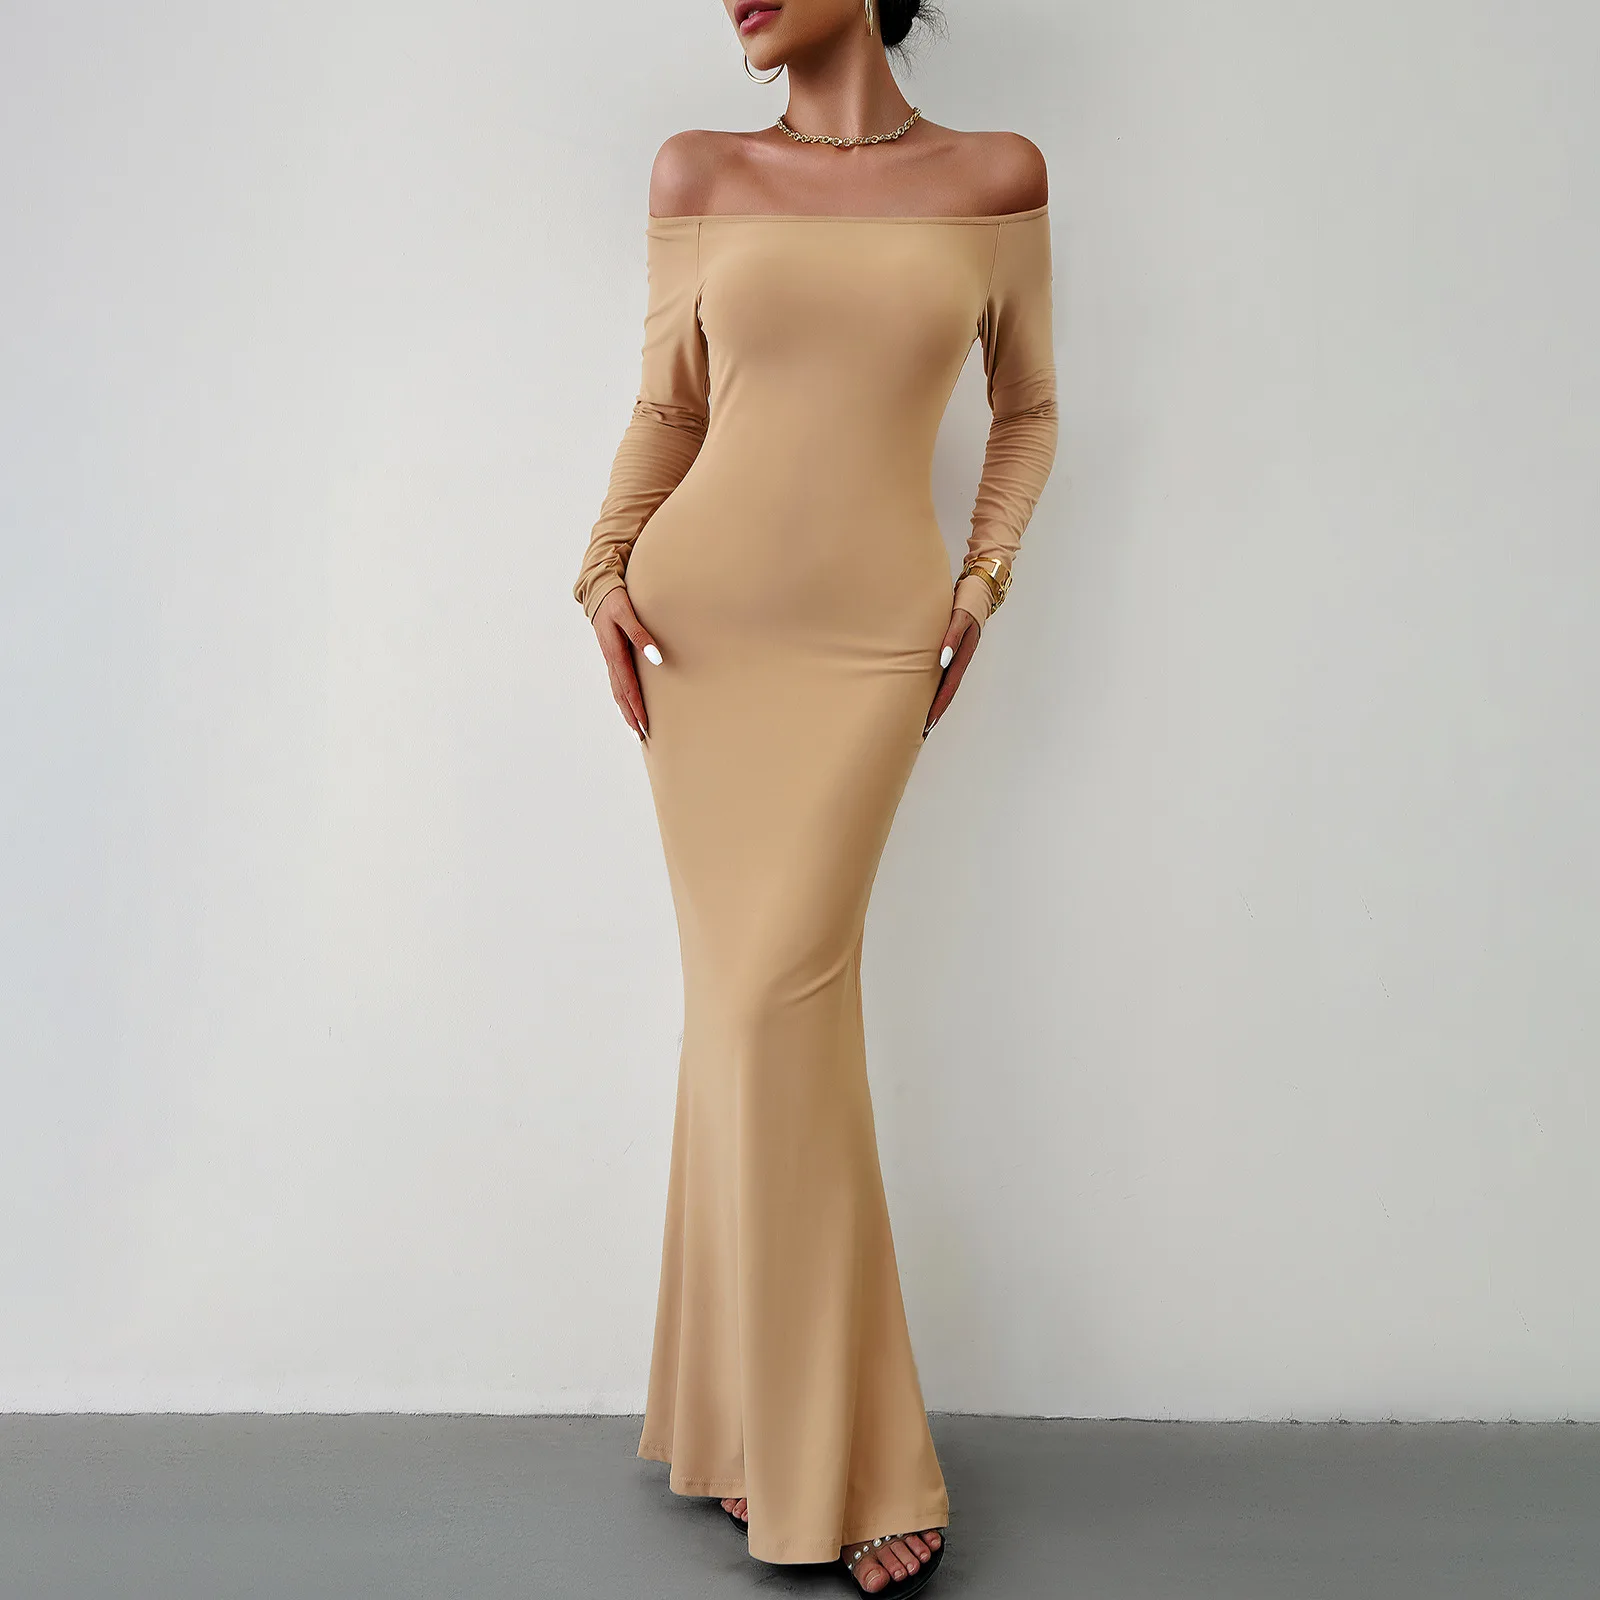 

YEAE Sexy Slim Waist One Shoulder Dress Long Strapless Backless Solid Color Women's Dresses Kardashian Traf Sexy Elegant in New